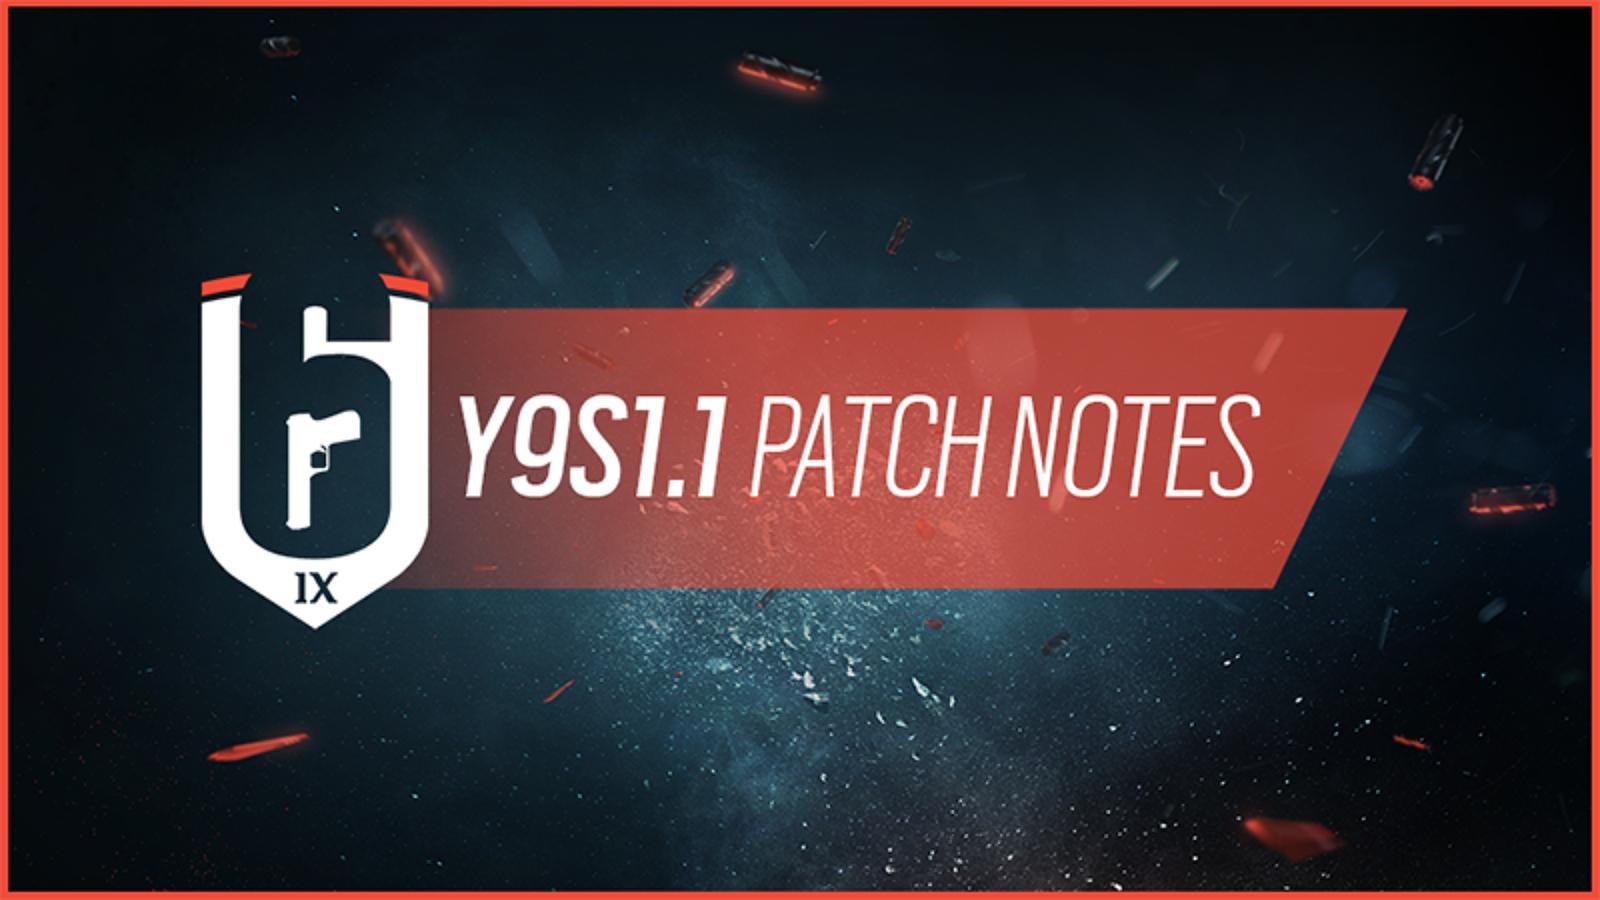 an image of Rainbow 6 y9s1.1 patch notes